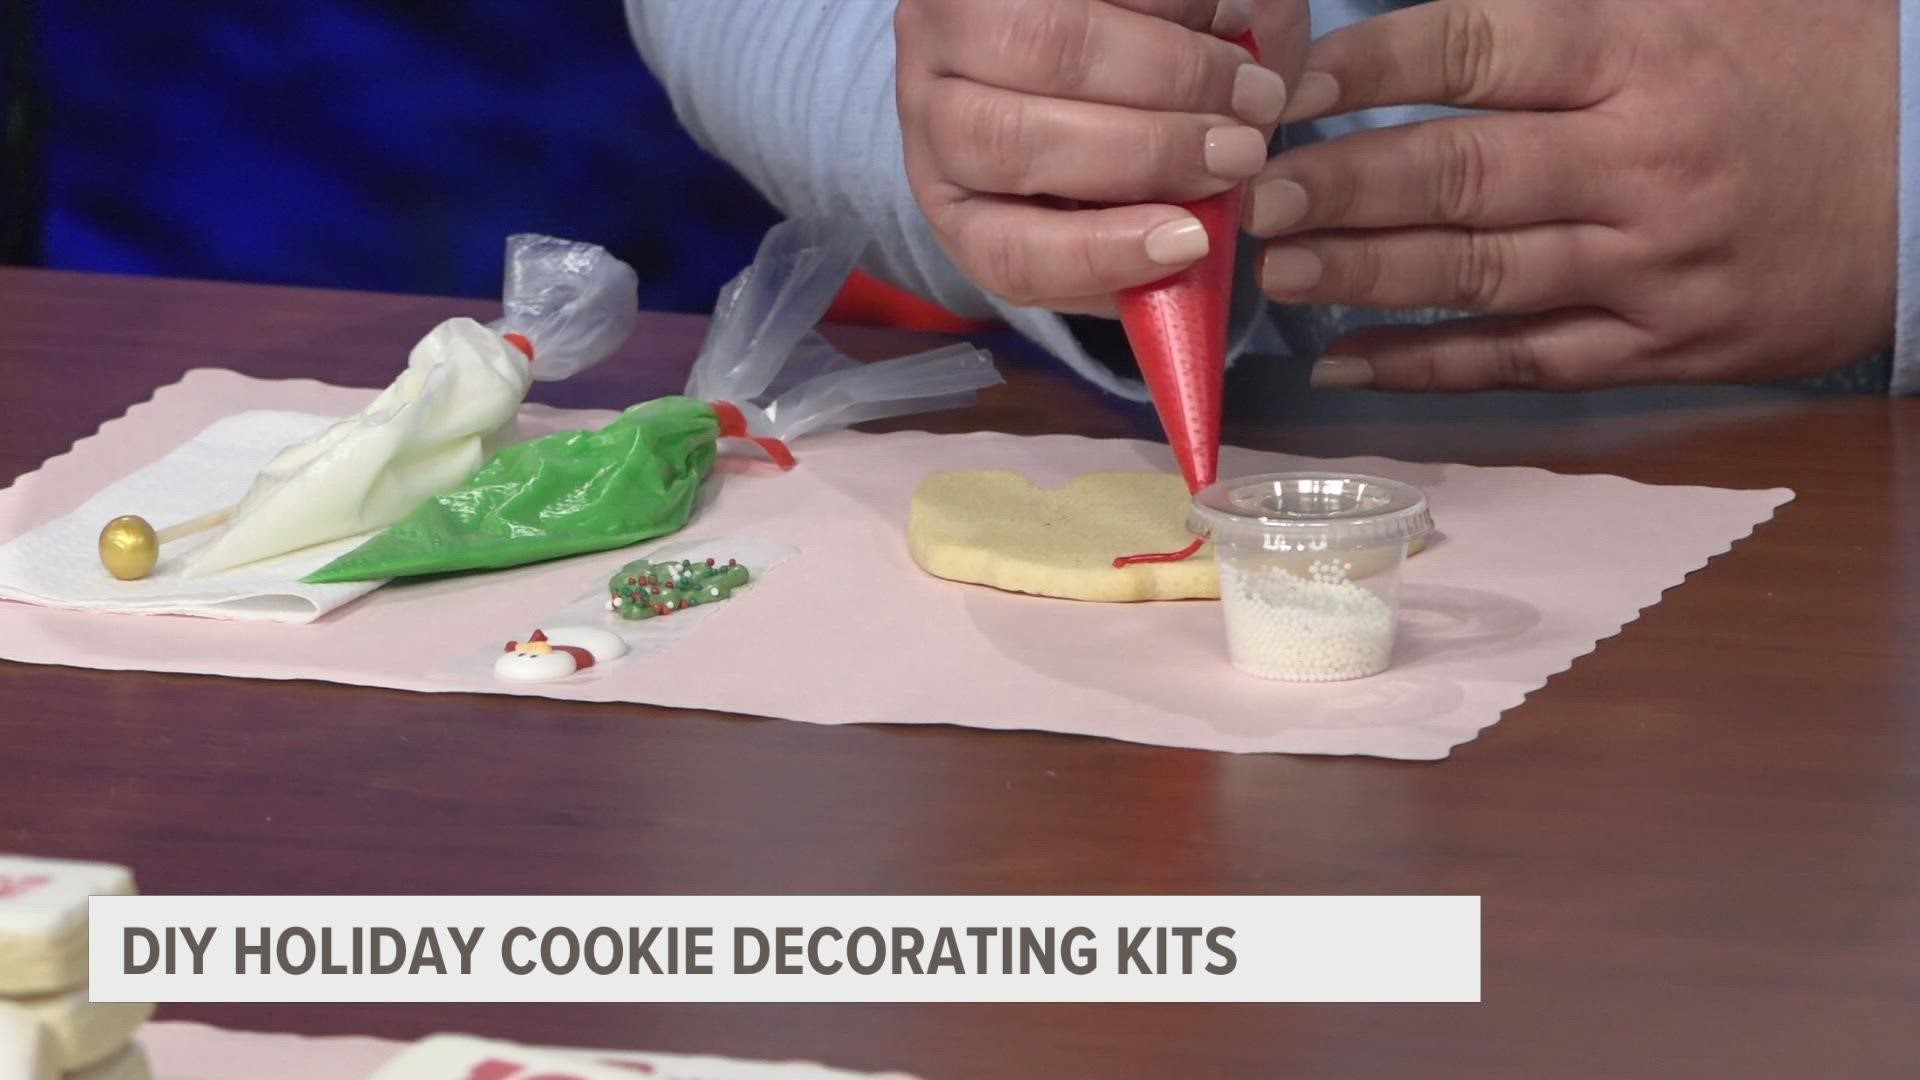 The 13 OYS Mornings team followed Vanessa Shmanske with Sweet Details GR to decorate their holiday cookies.